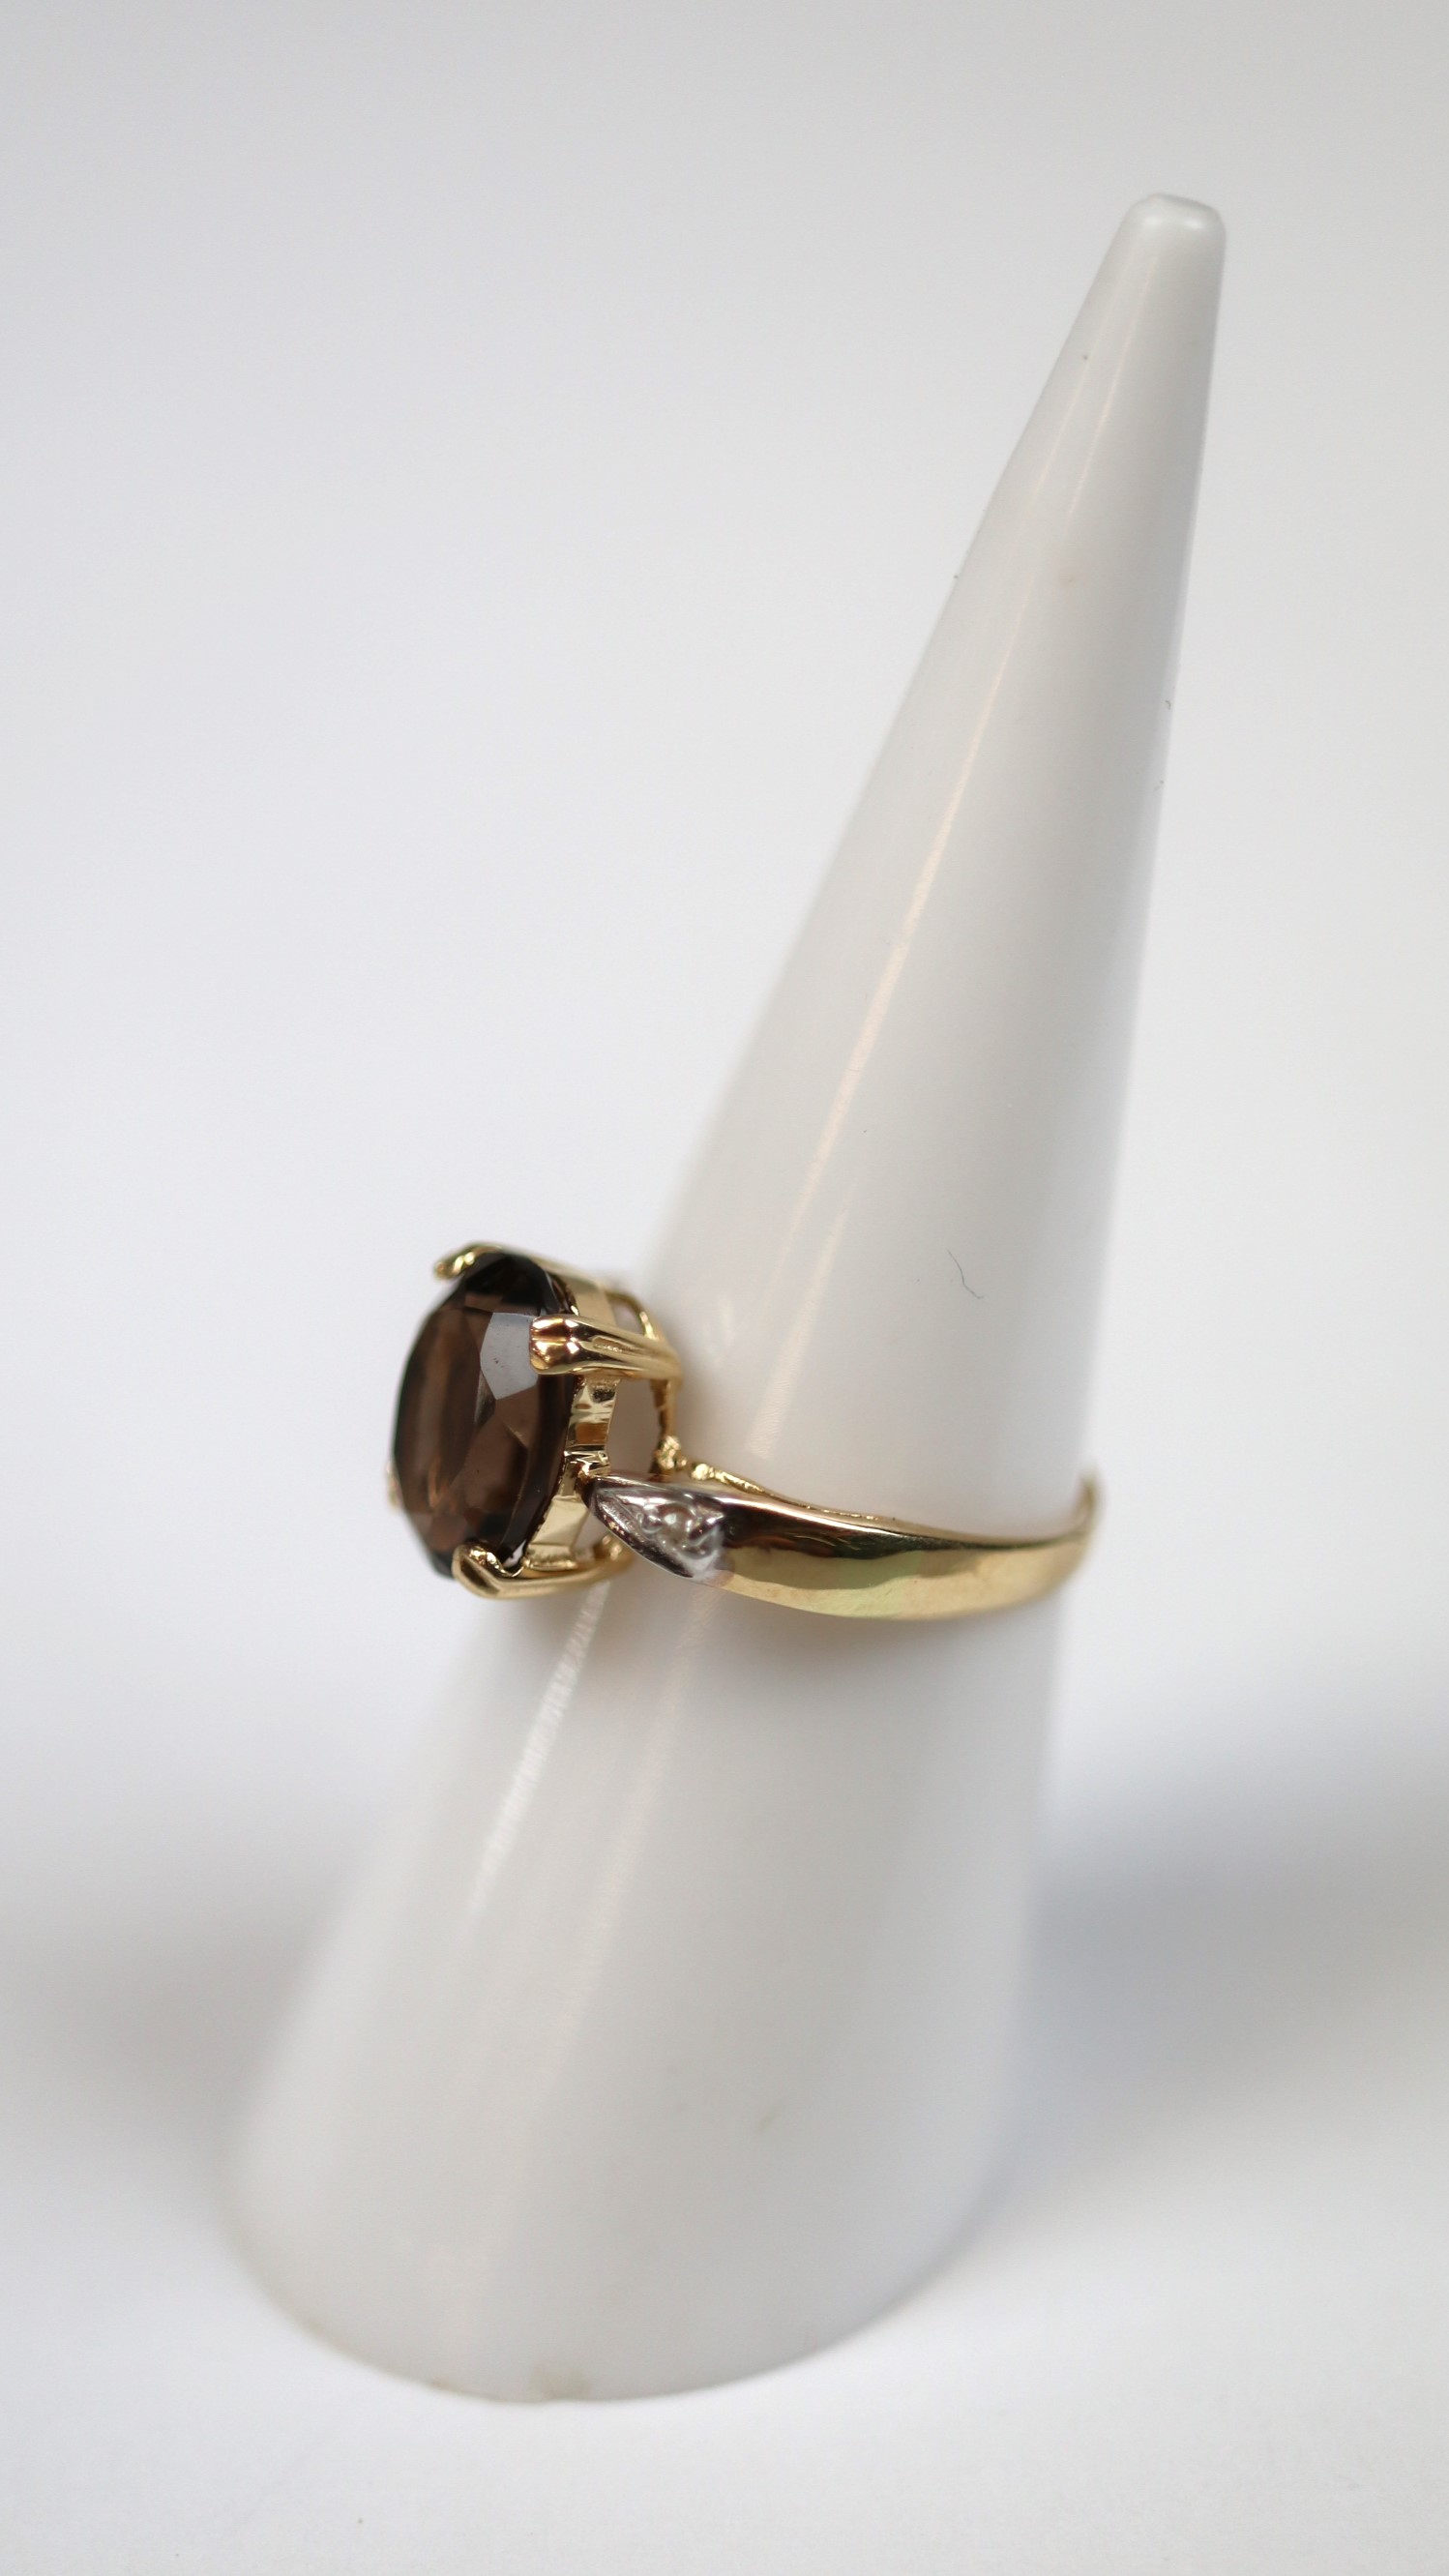 9ct topaz and diamond ring - Size L - Image 2 of 2